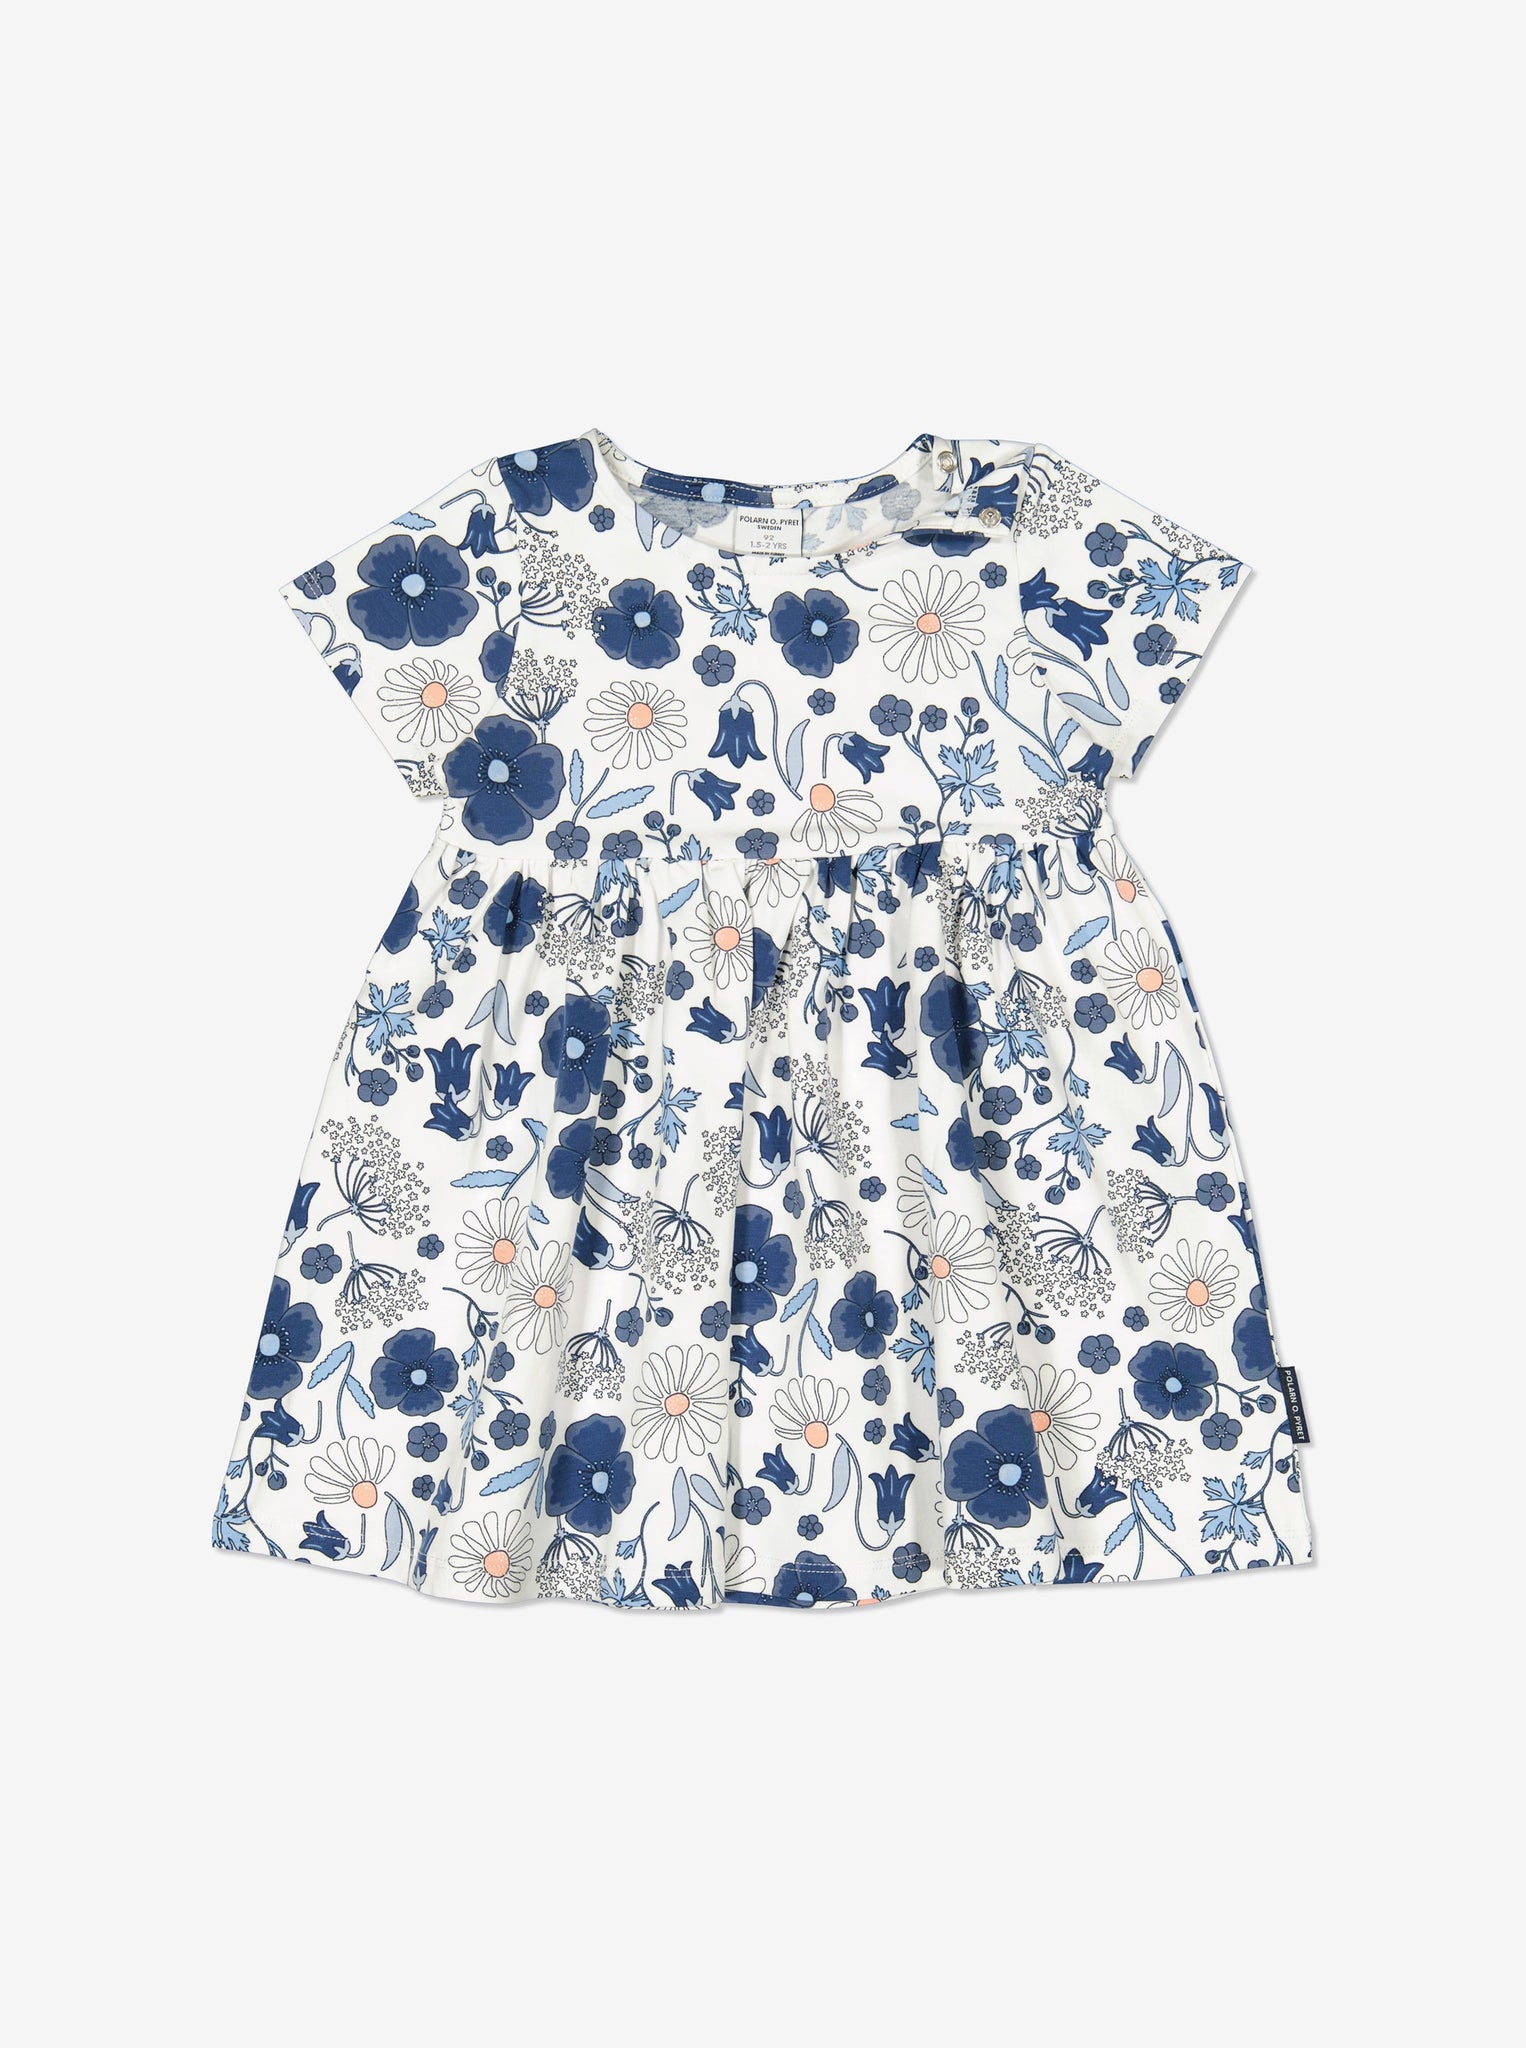 Organic Blue Floral Girls Dress from Polarn O. Pyret Kidswear. Made using sustainable sourced materials.